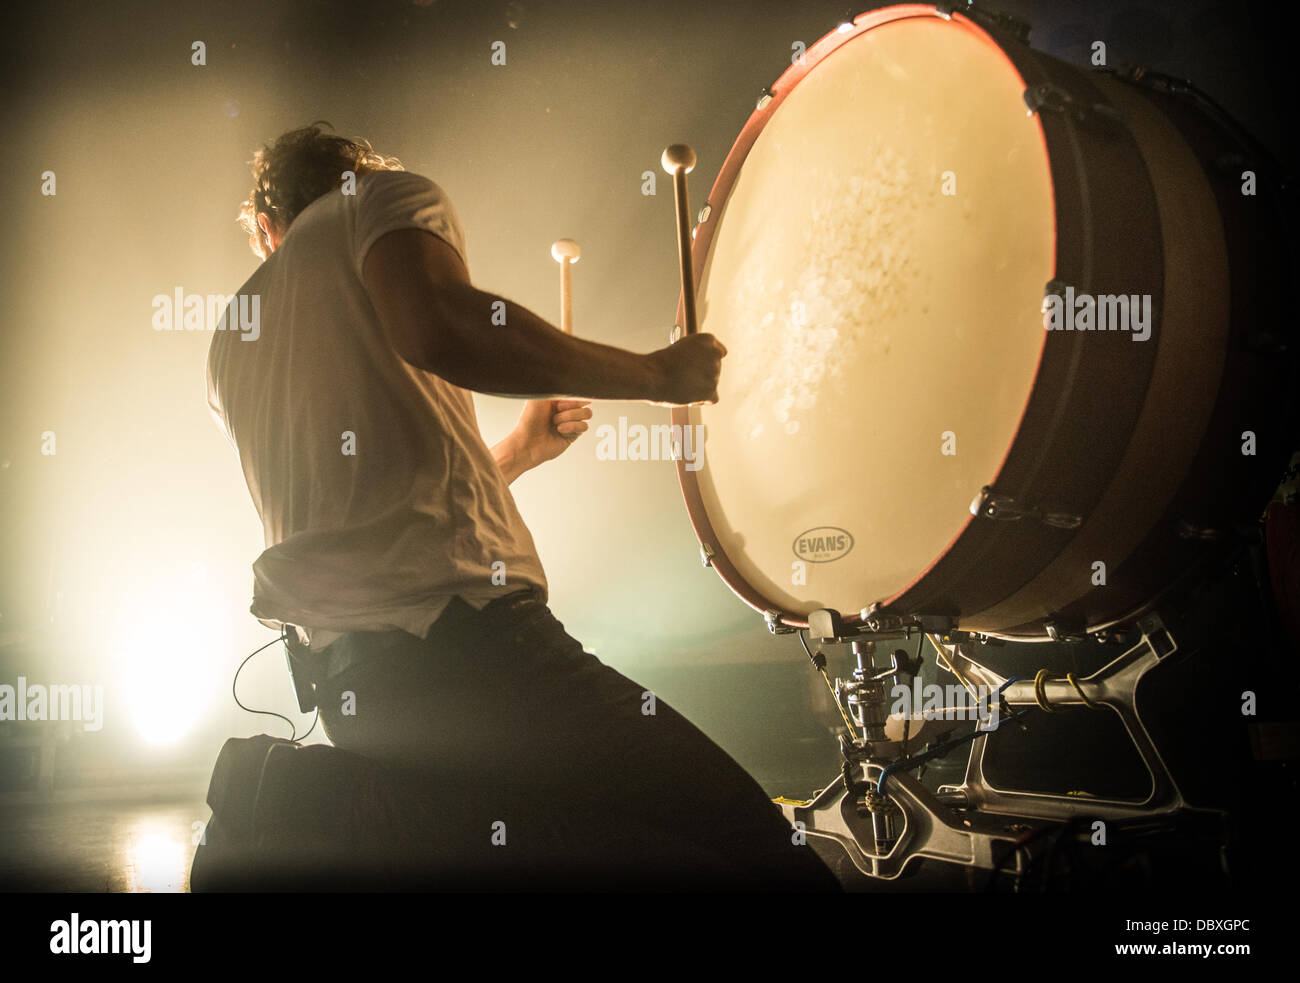 Dan Reynolds of Imagine Dragons performing live at Metro in Chicago, IL July 31, 2013 Stock Photo